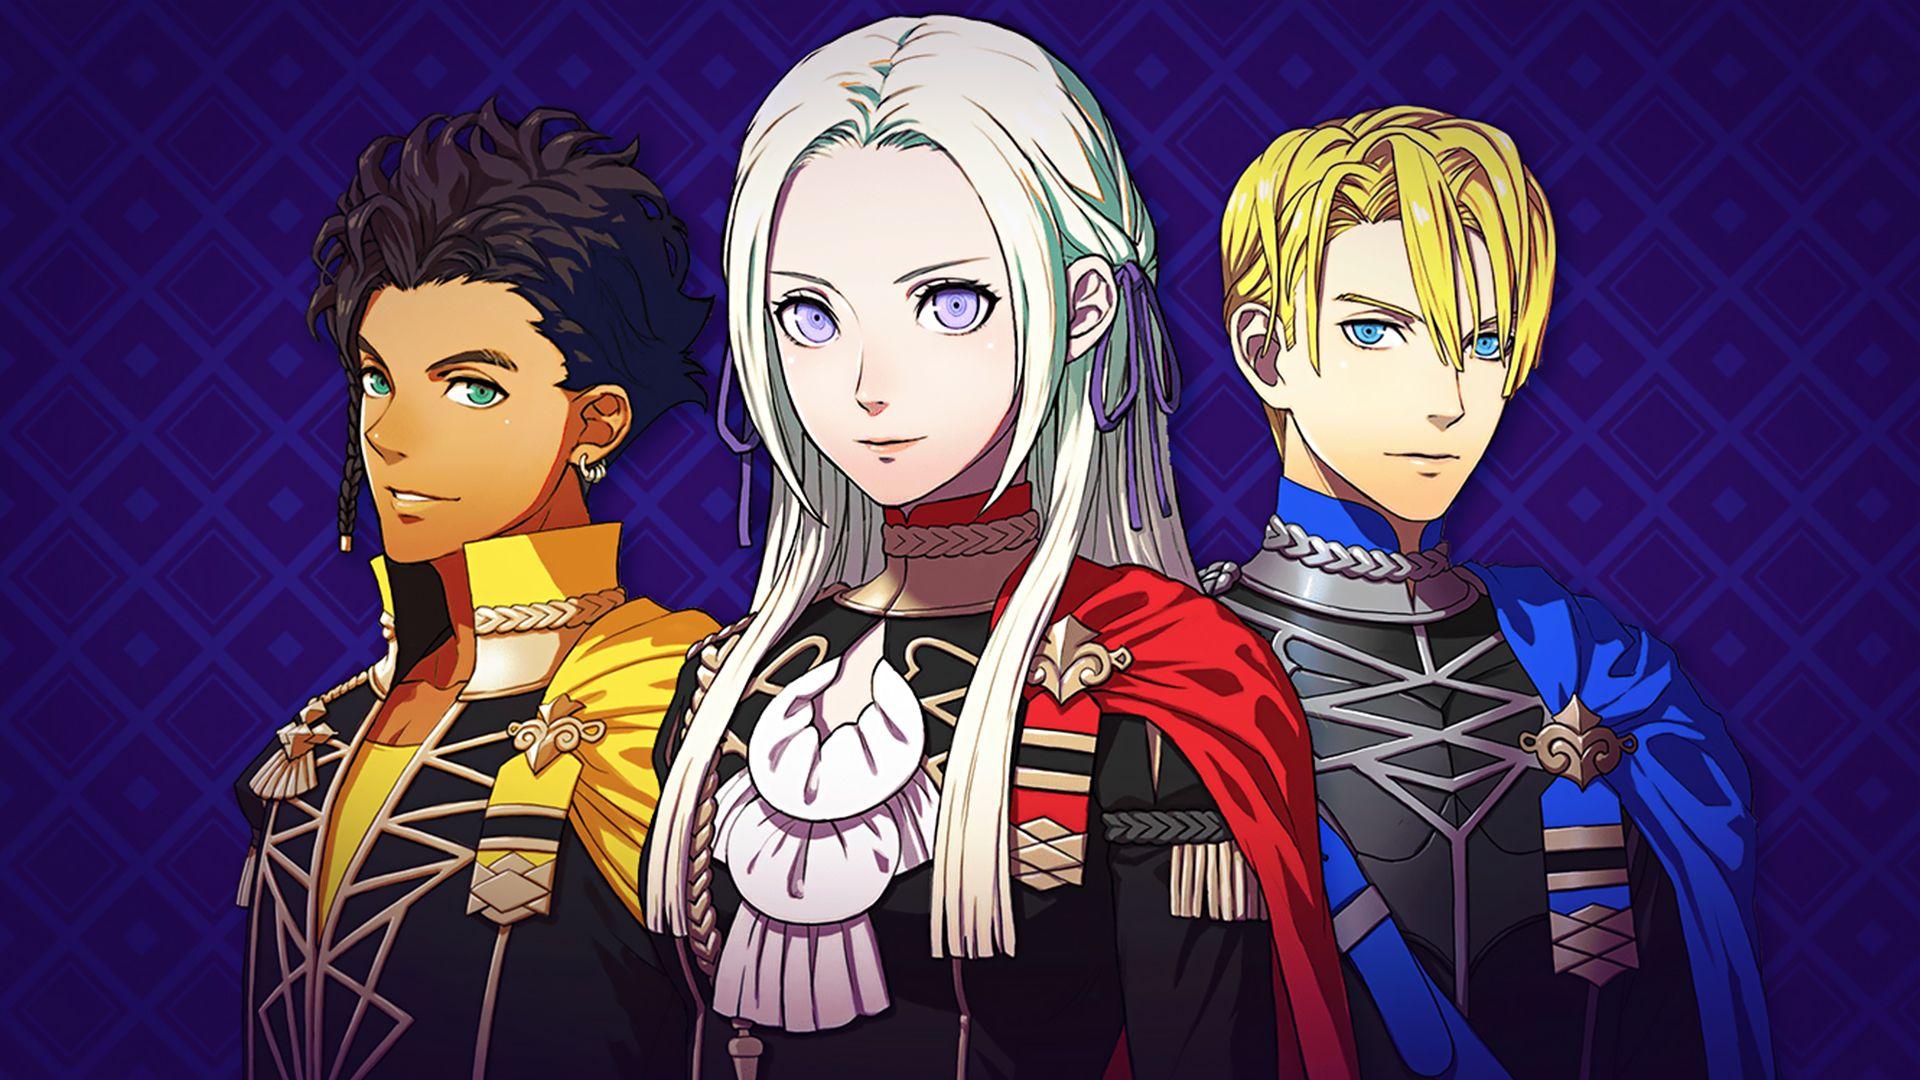 Fire Emblem: Three Houses - How to Get Pink Hair and Blue Hair - wide 3